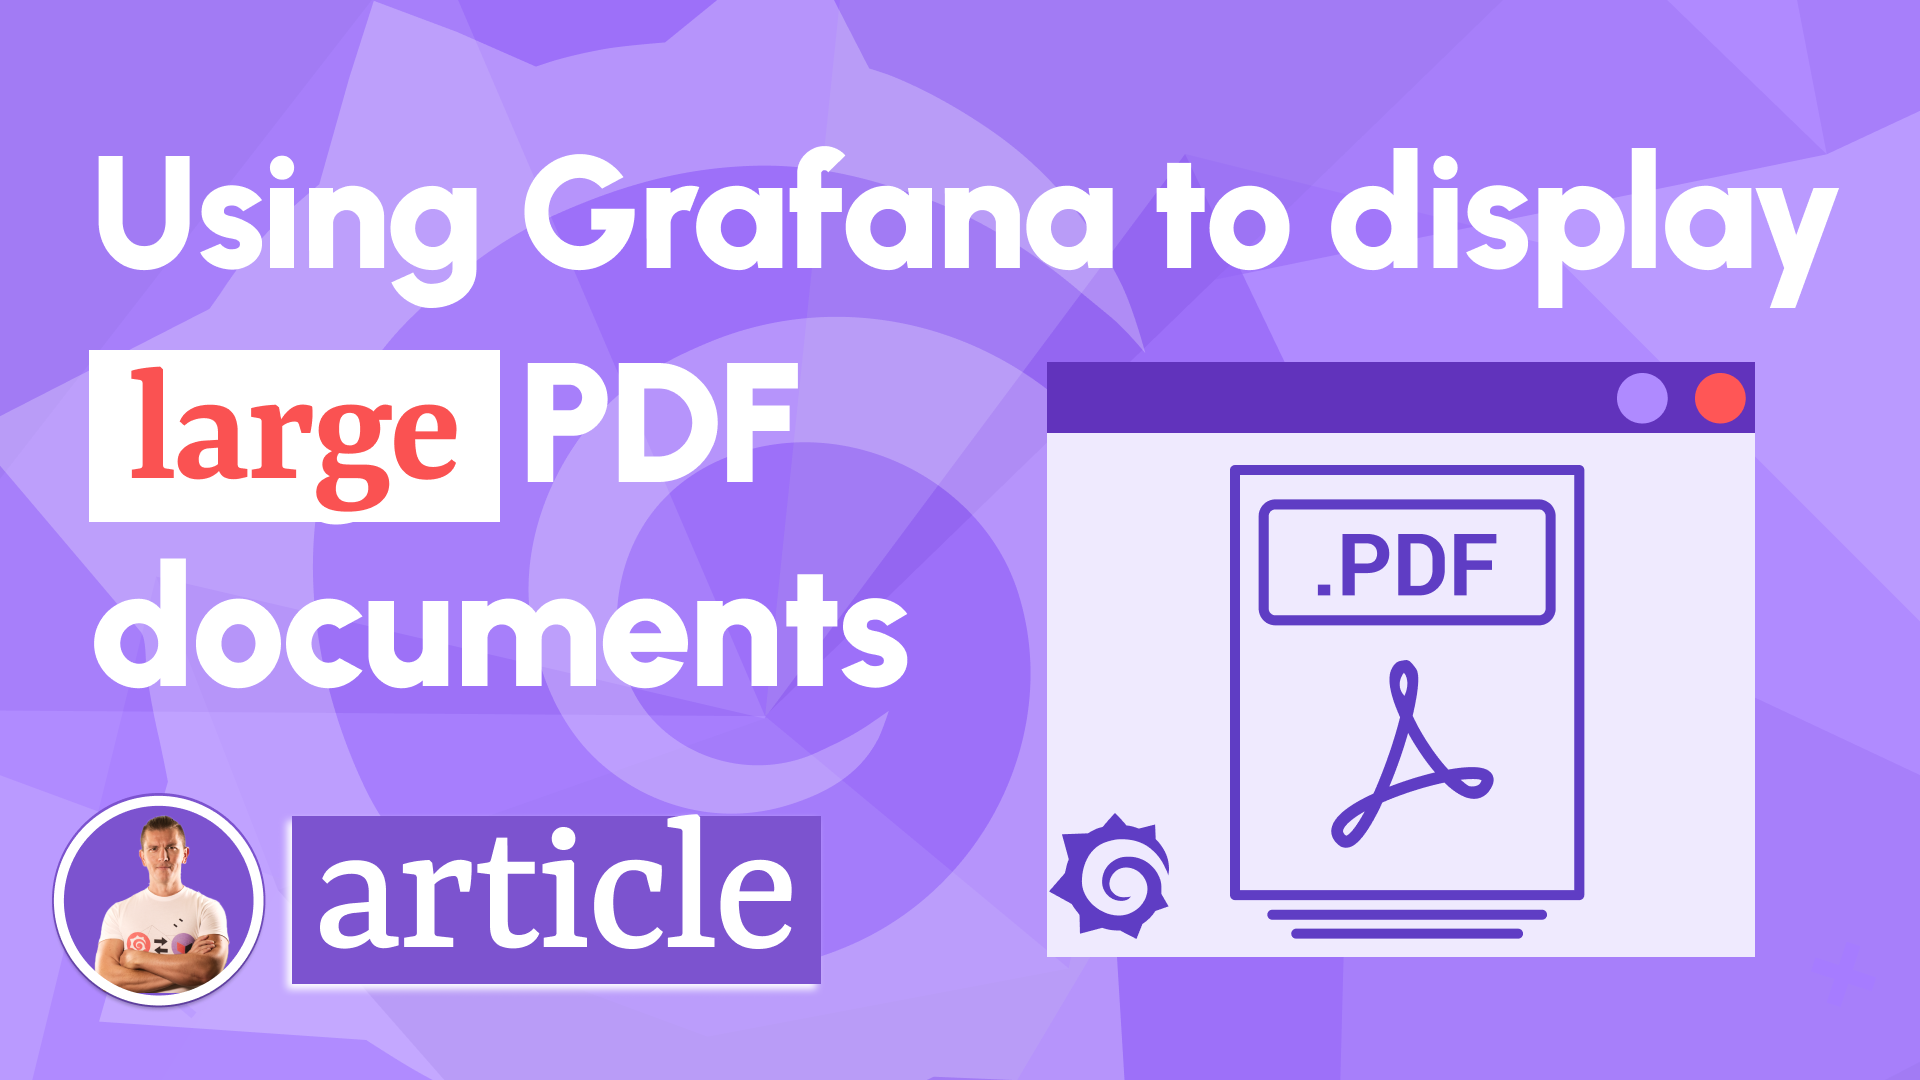 Using Grafana to display Large PDF documents? We've got you covered